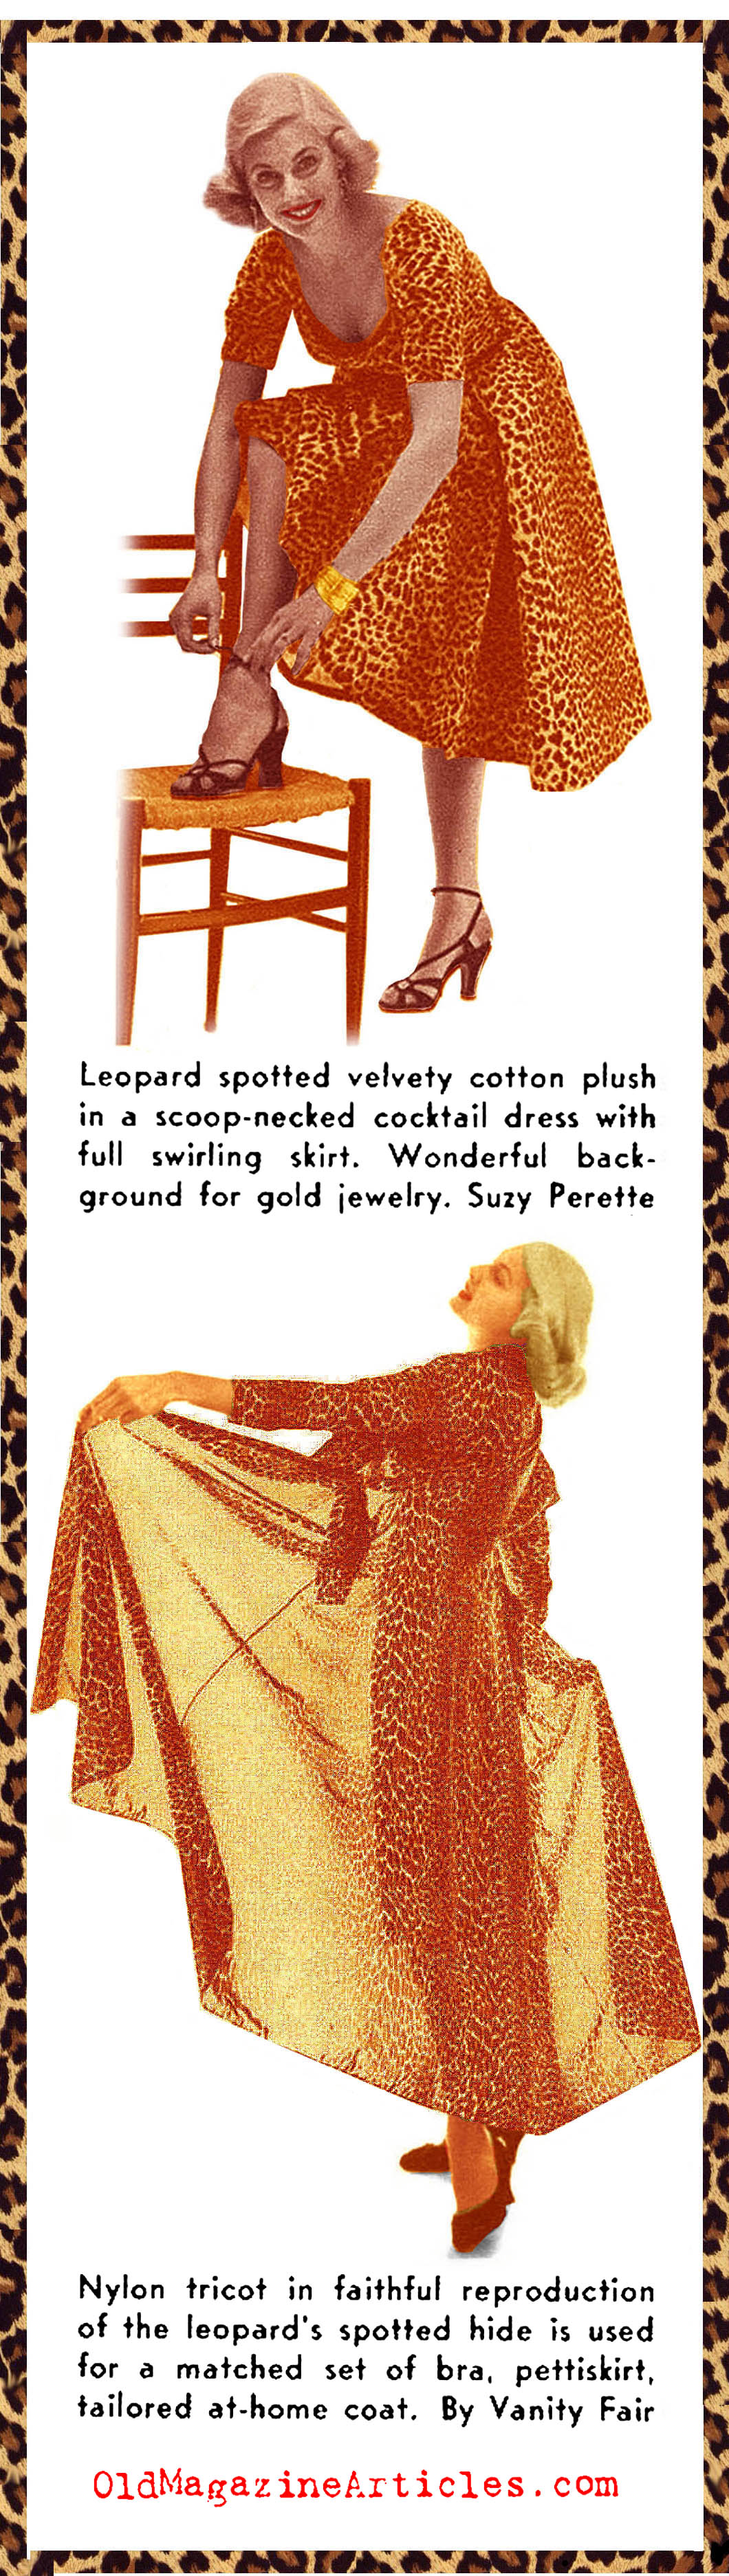 Leopard and Zebra Prints Become the Thing, Again (Quick Magazine, 1954)